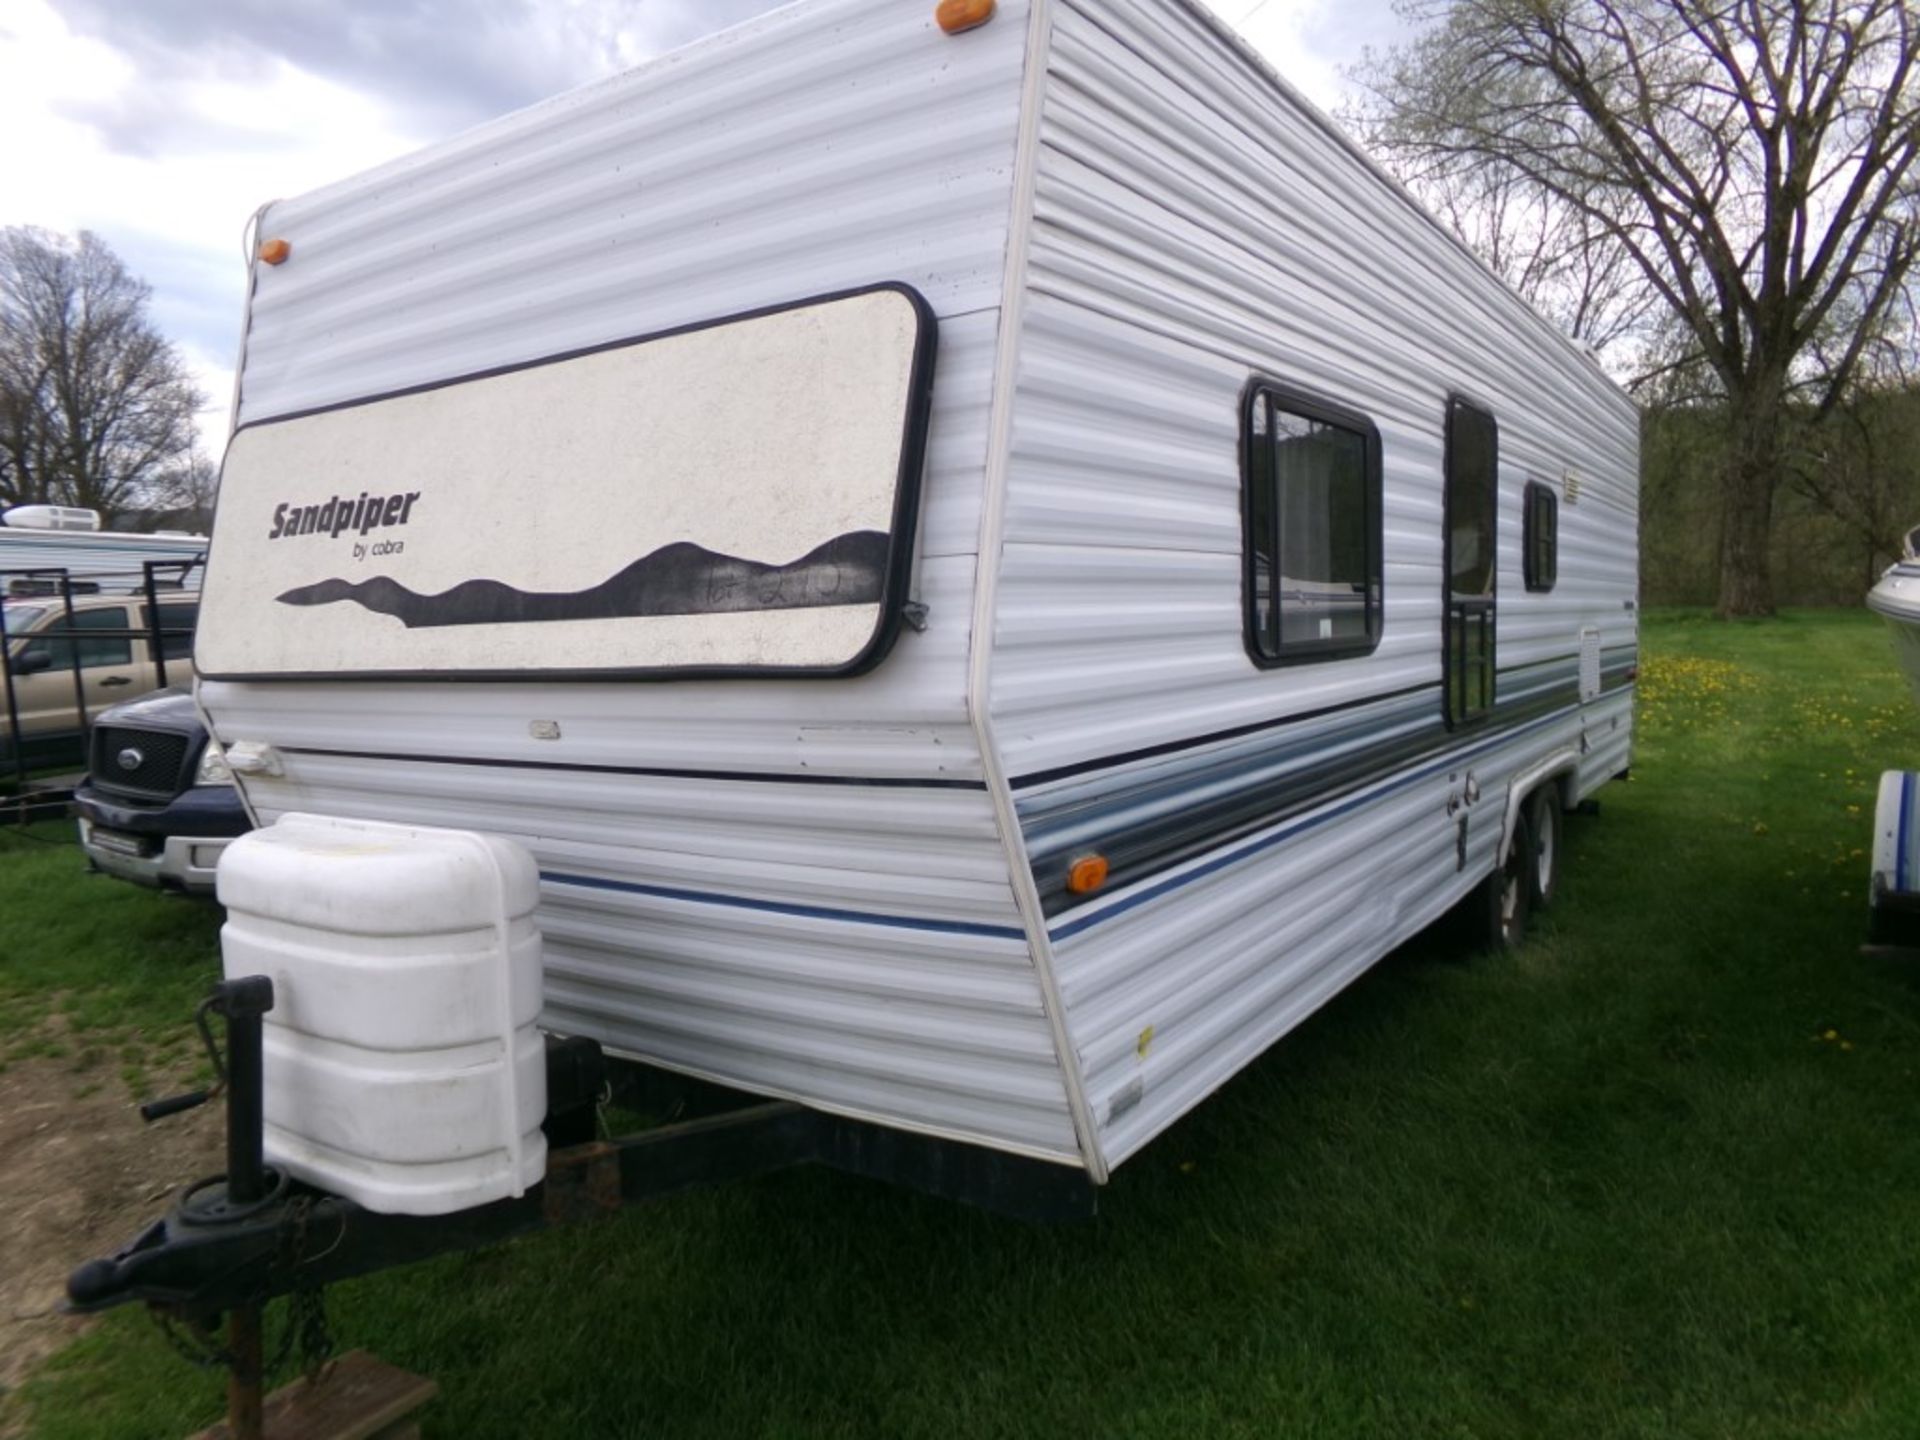 1995 Sandpiper by Cobra 24' Bumper Tow Camper with Awning, Nice Shape, Vin #: 1CATP24T5SH006824 -